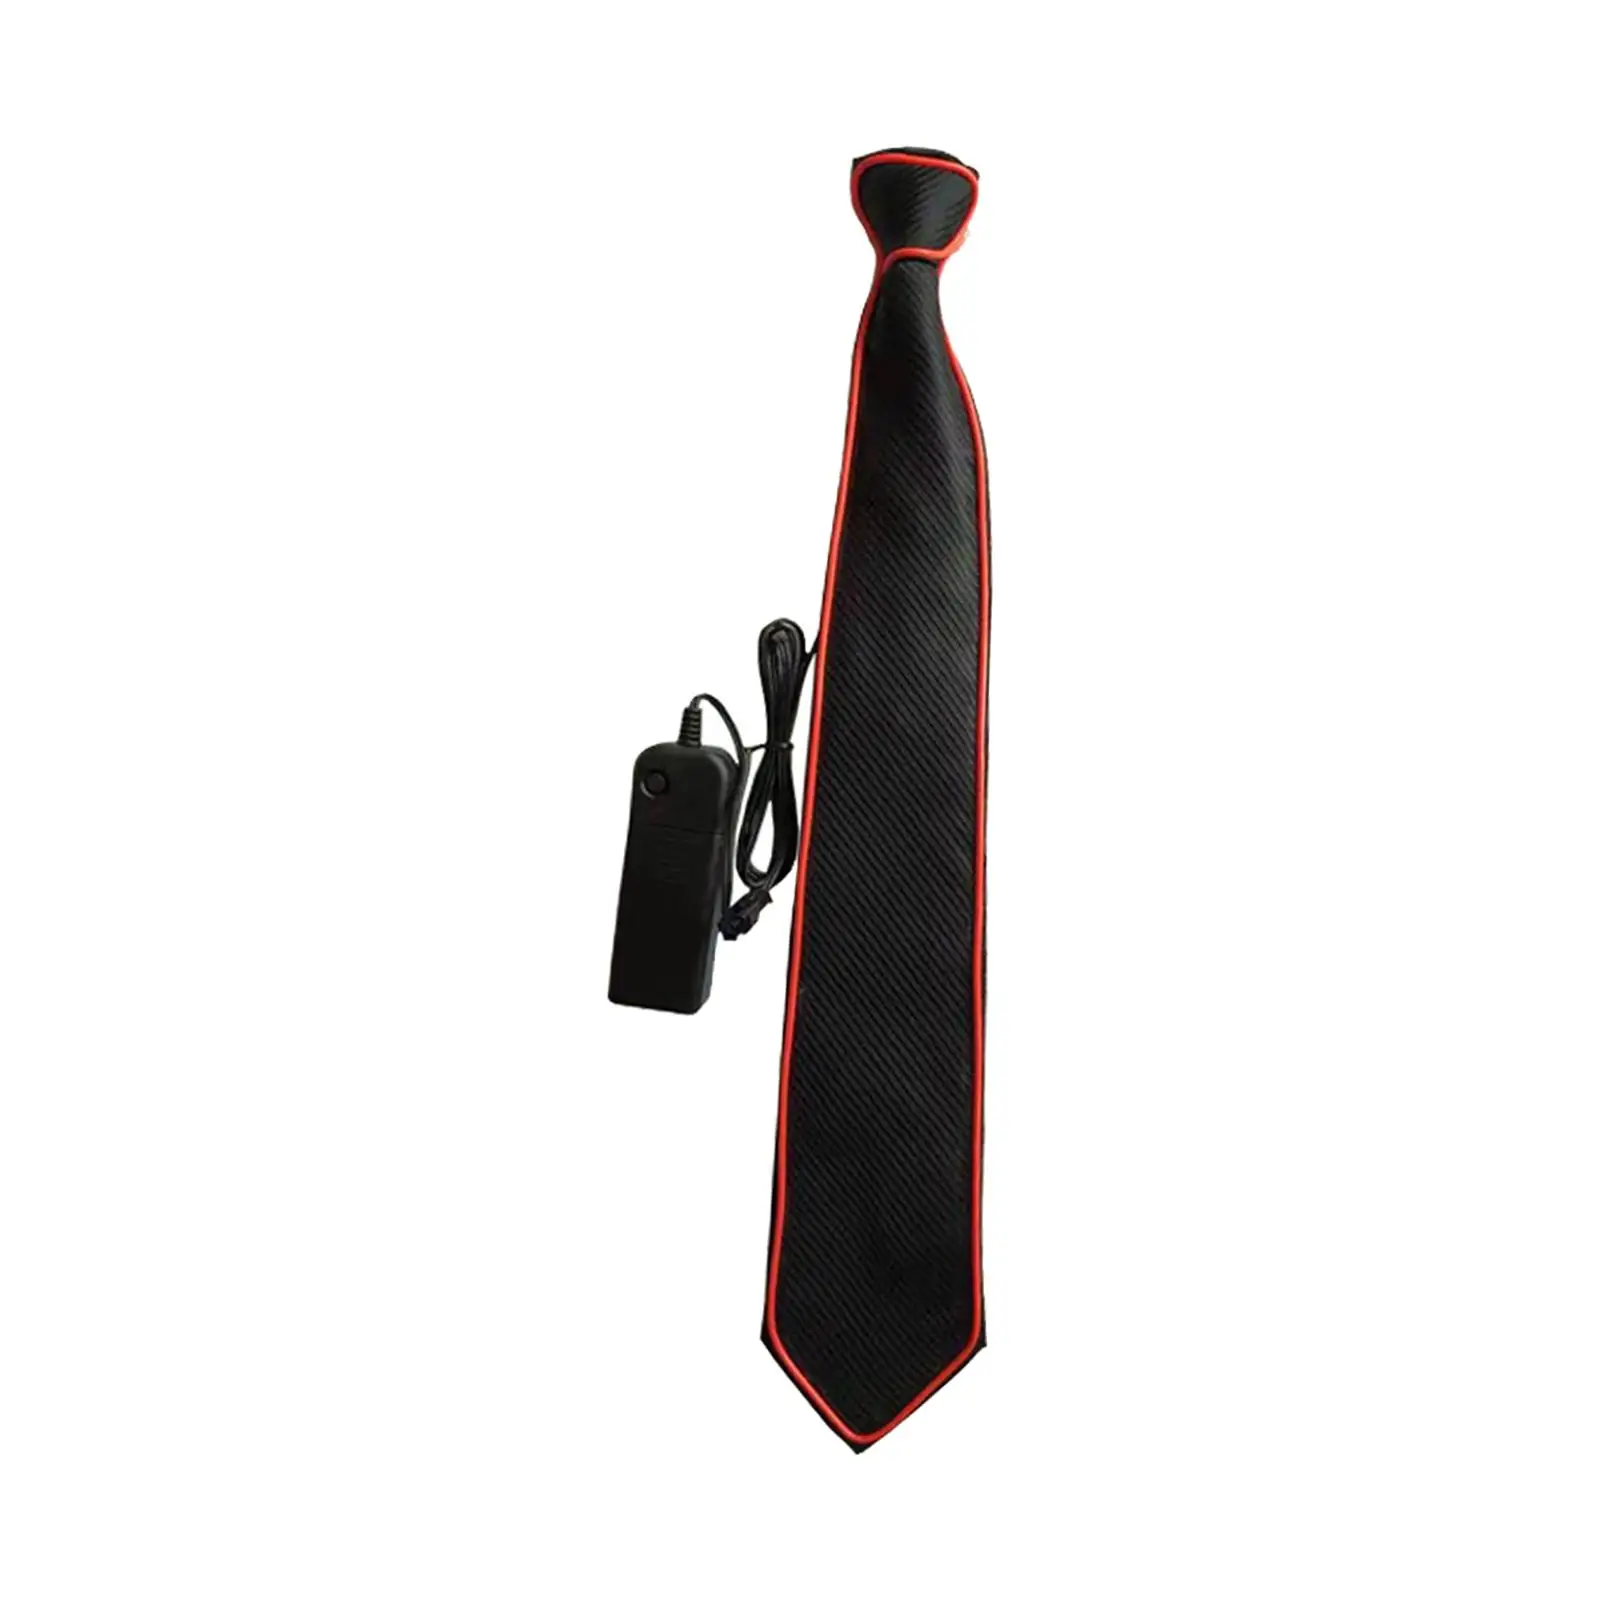 Mens Glowing tie Size Formal Flashing Necktie Luminous Novelty LED Necktie for Parties Halloween Fashion Show Clubs Festival